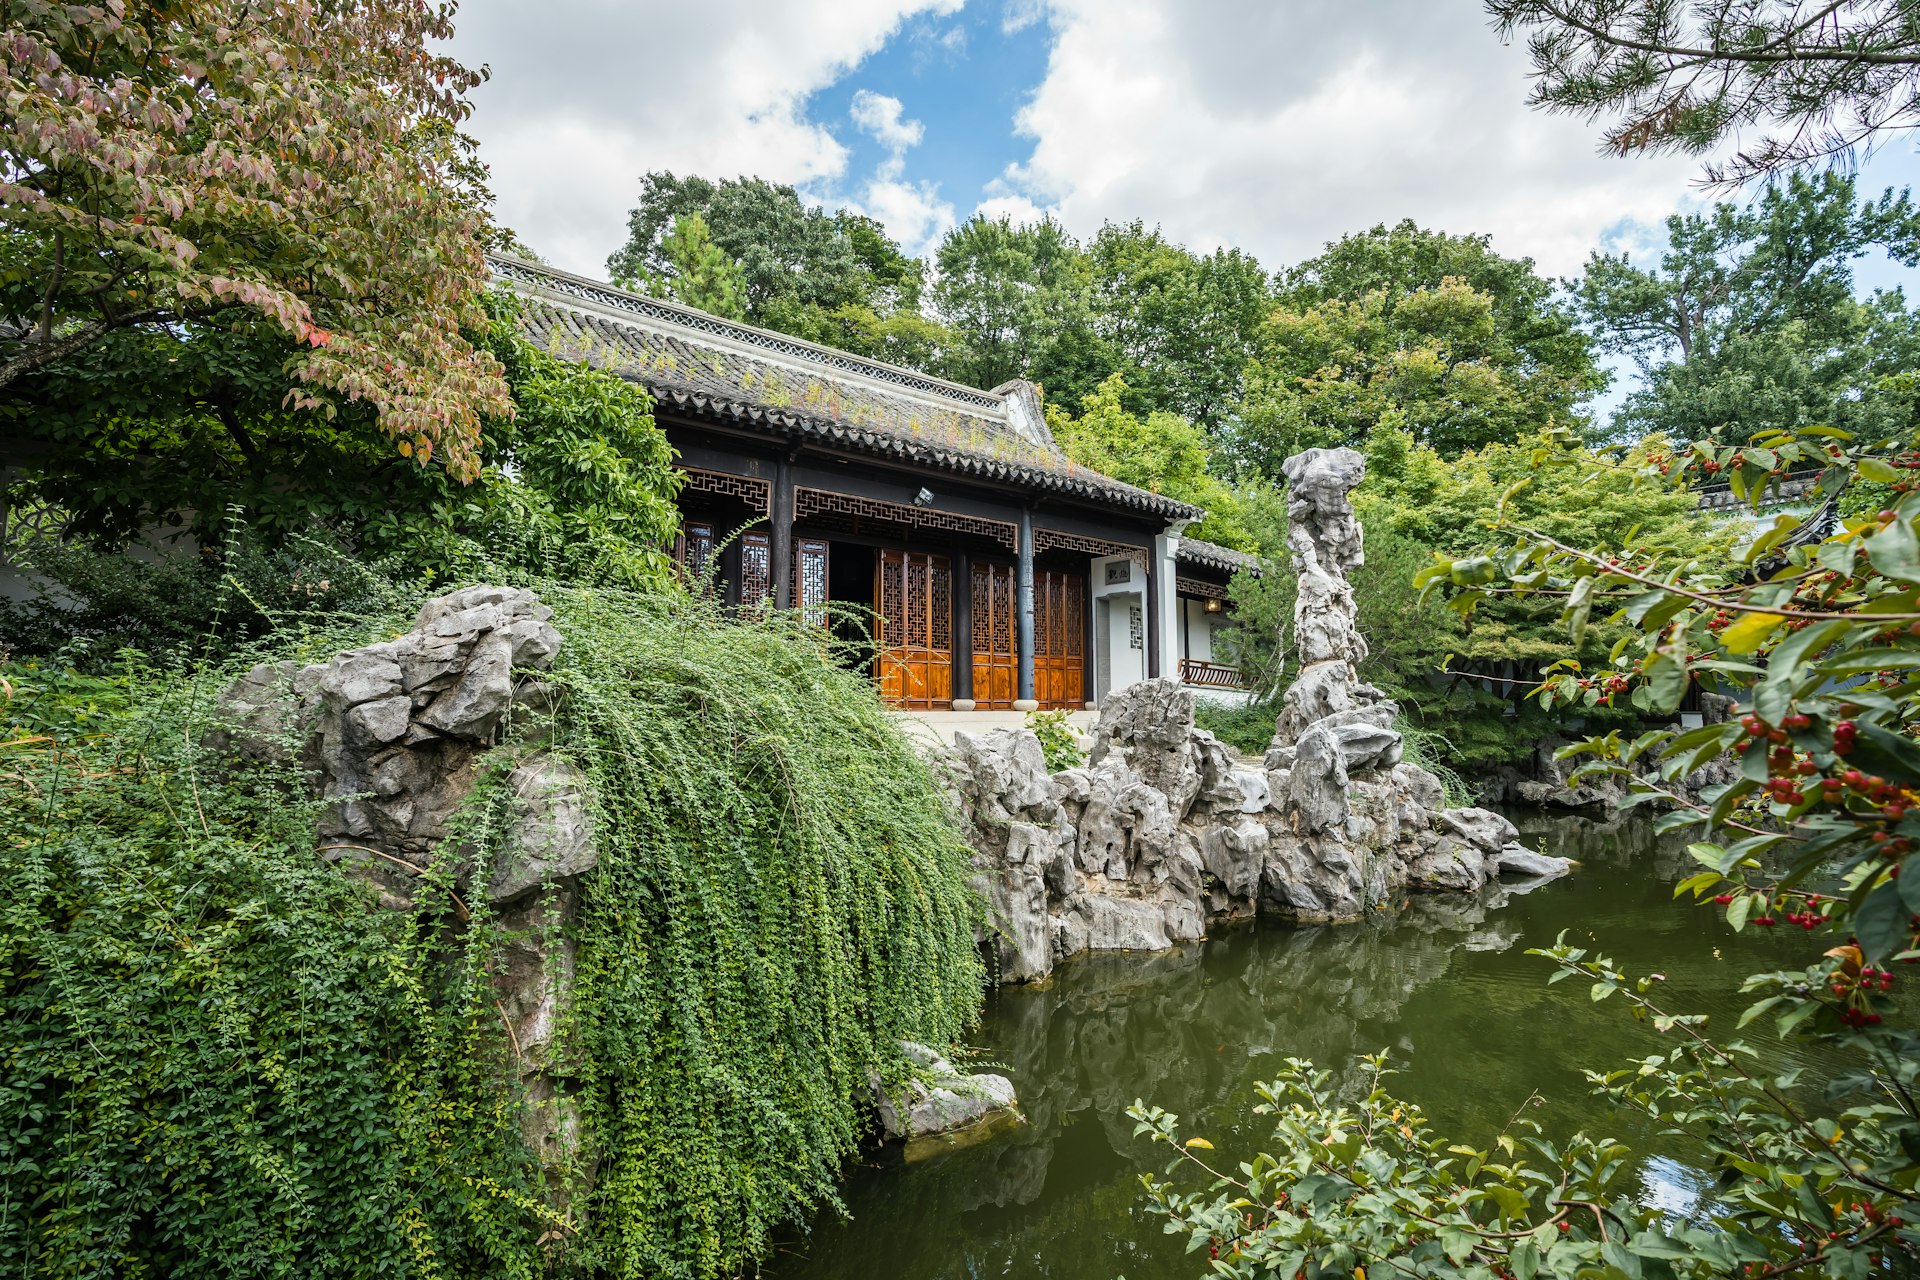 A pagoda-style roofed pavilion on a pond in the Chinese Scholar's Garden, surrounded by green trees